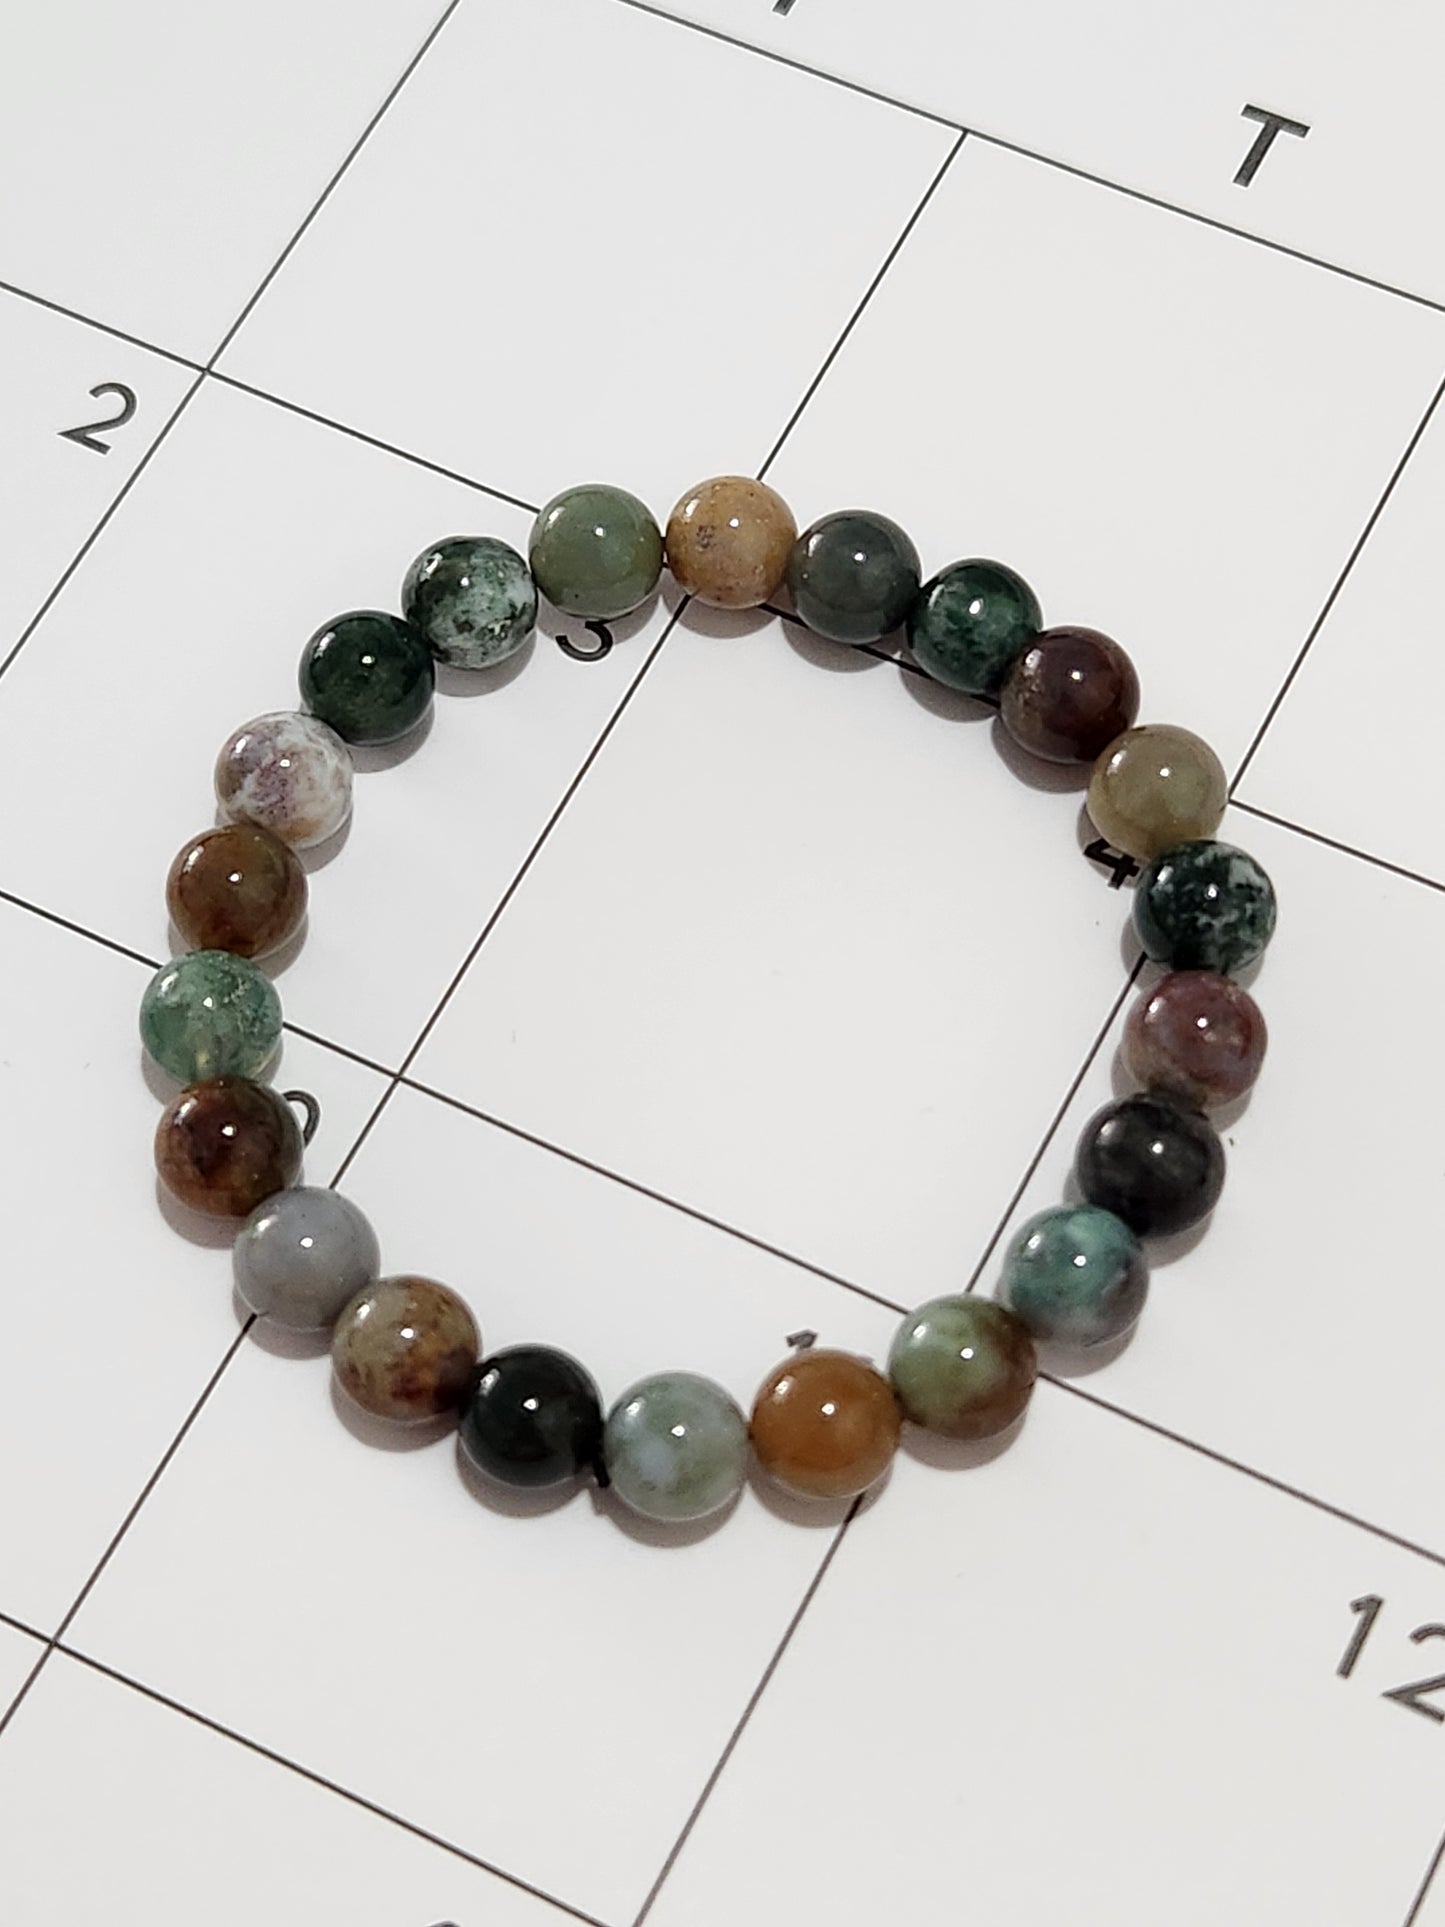 Indian Agate Stone Bracelet - 8mm stones - emotional healing - security - strength